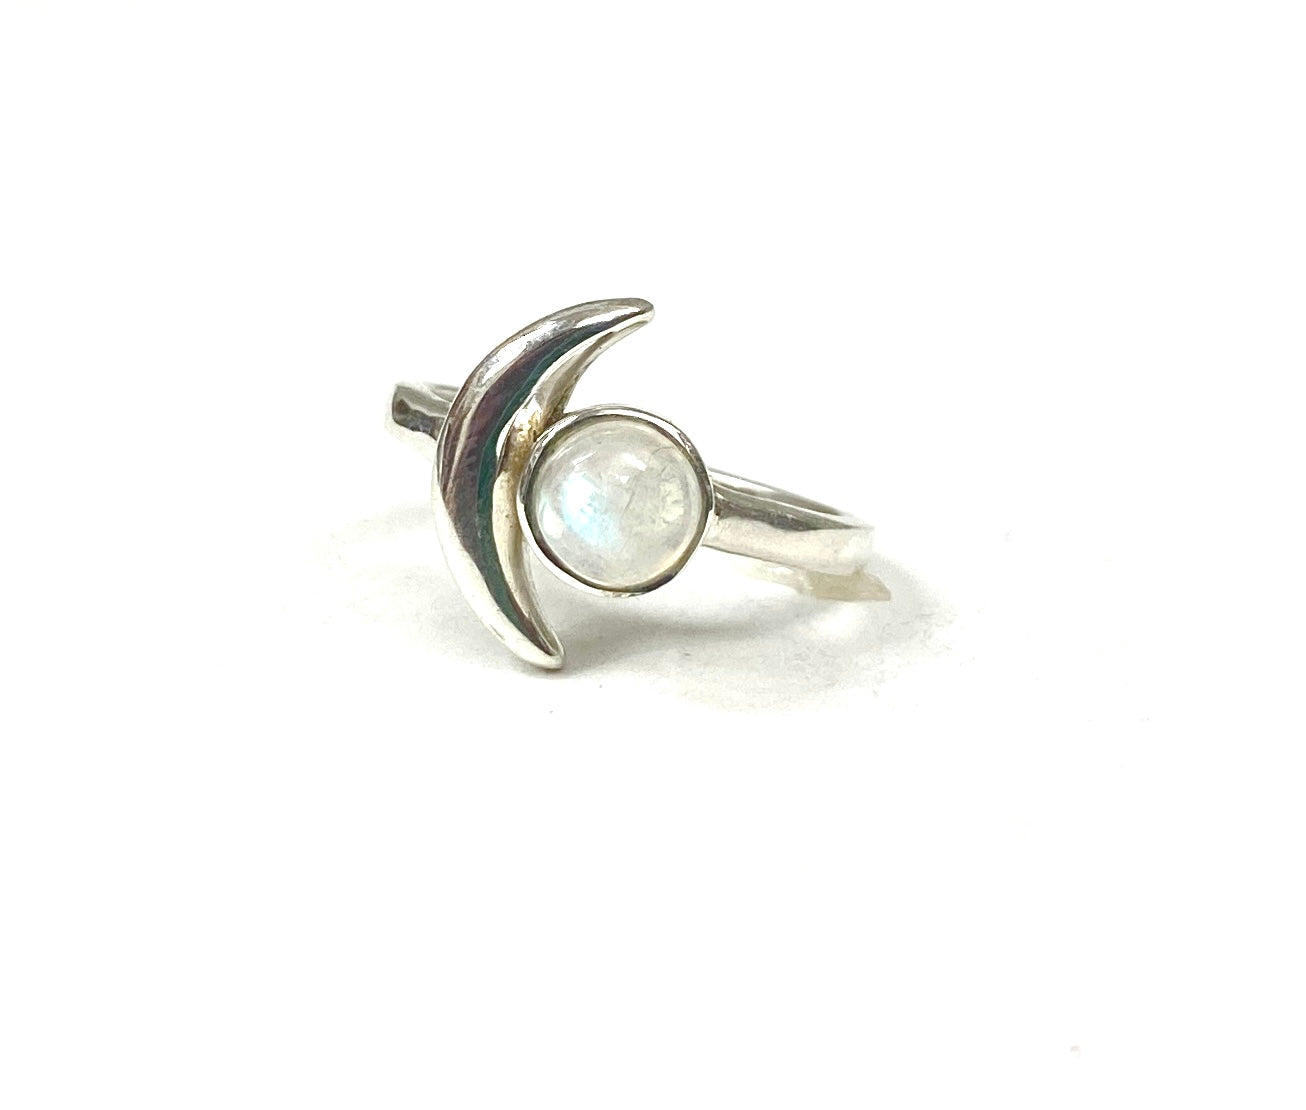 Sterling Silver Crescent Moon & Moonstone Ring - Available in sizes 5-9